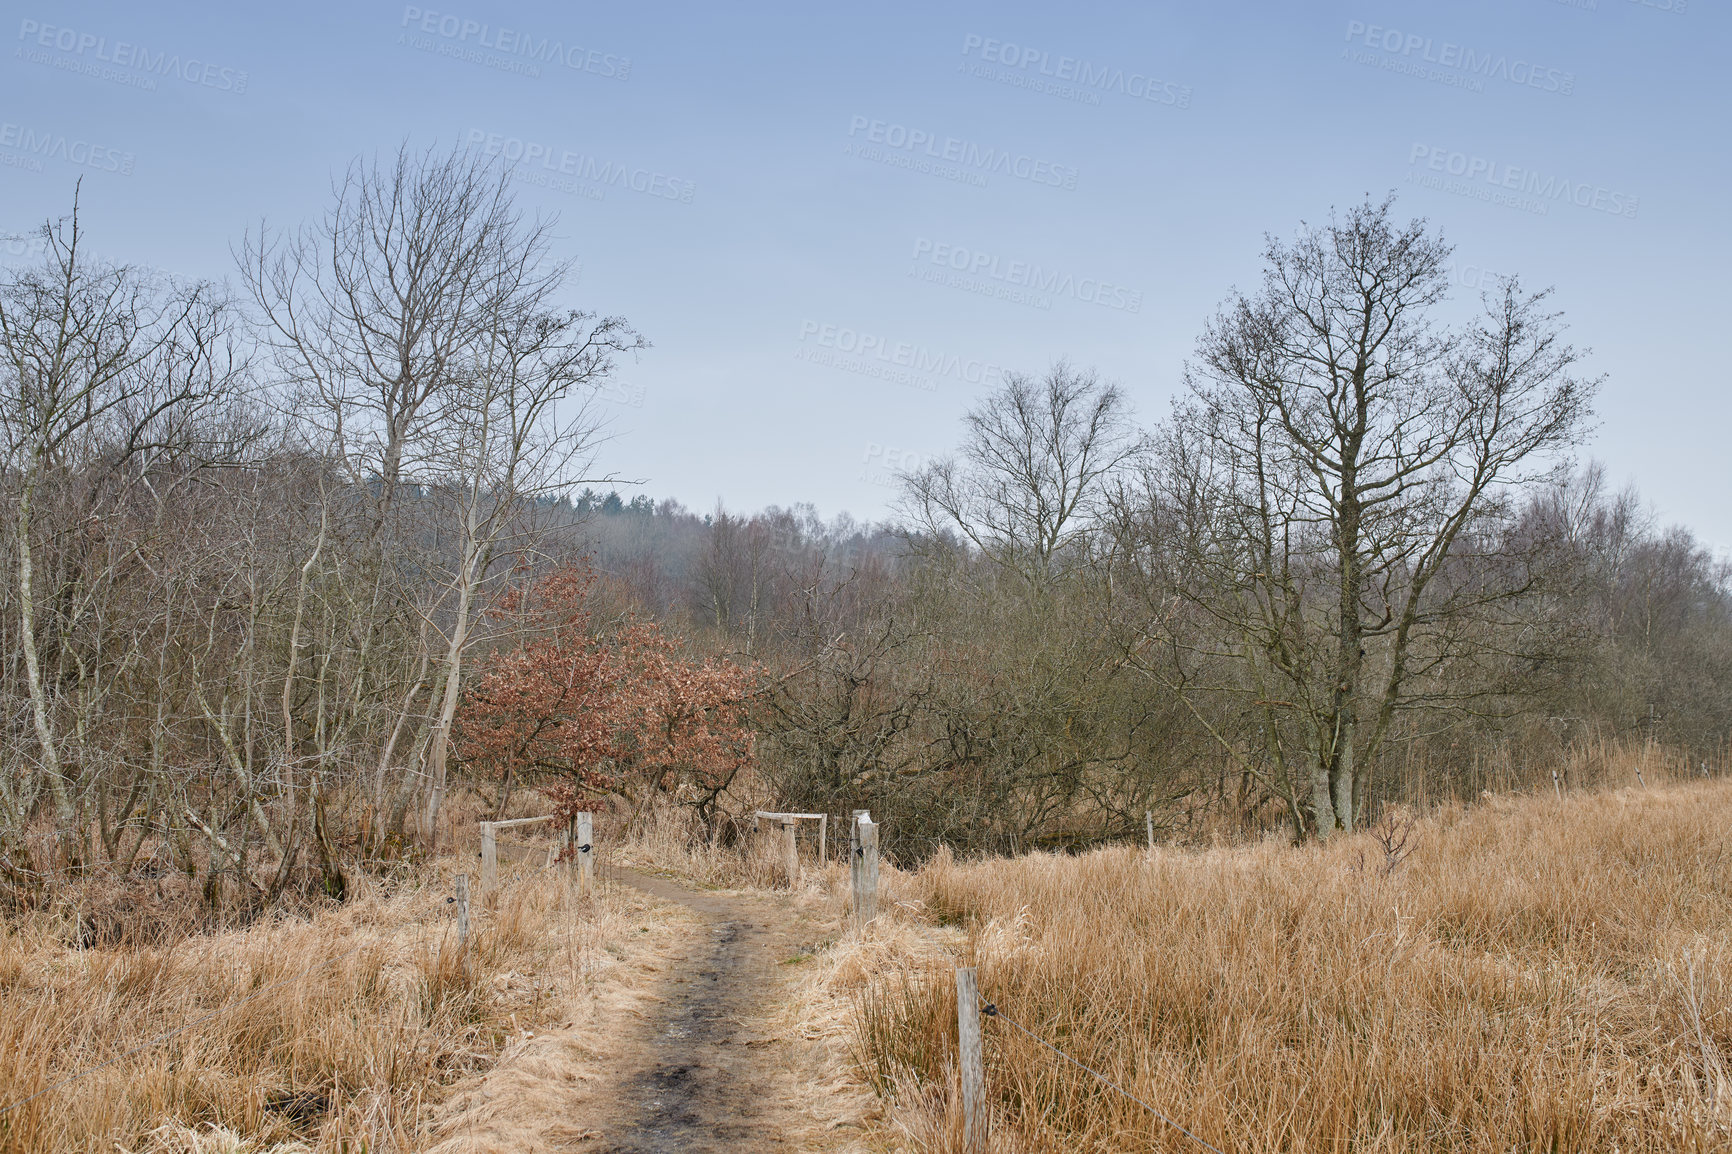 Buy stock photo A road and gate through a dry forest with tall leafless trees and brown meadow in Autumn. Peaceful and scenic landscape with dirt road in the woods leading to mysterious and secluded place in nature